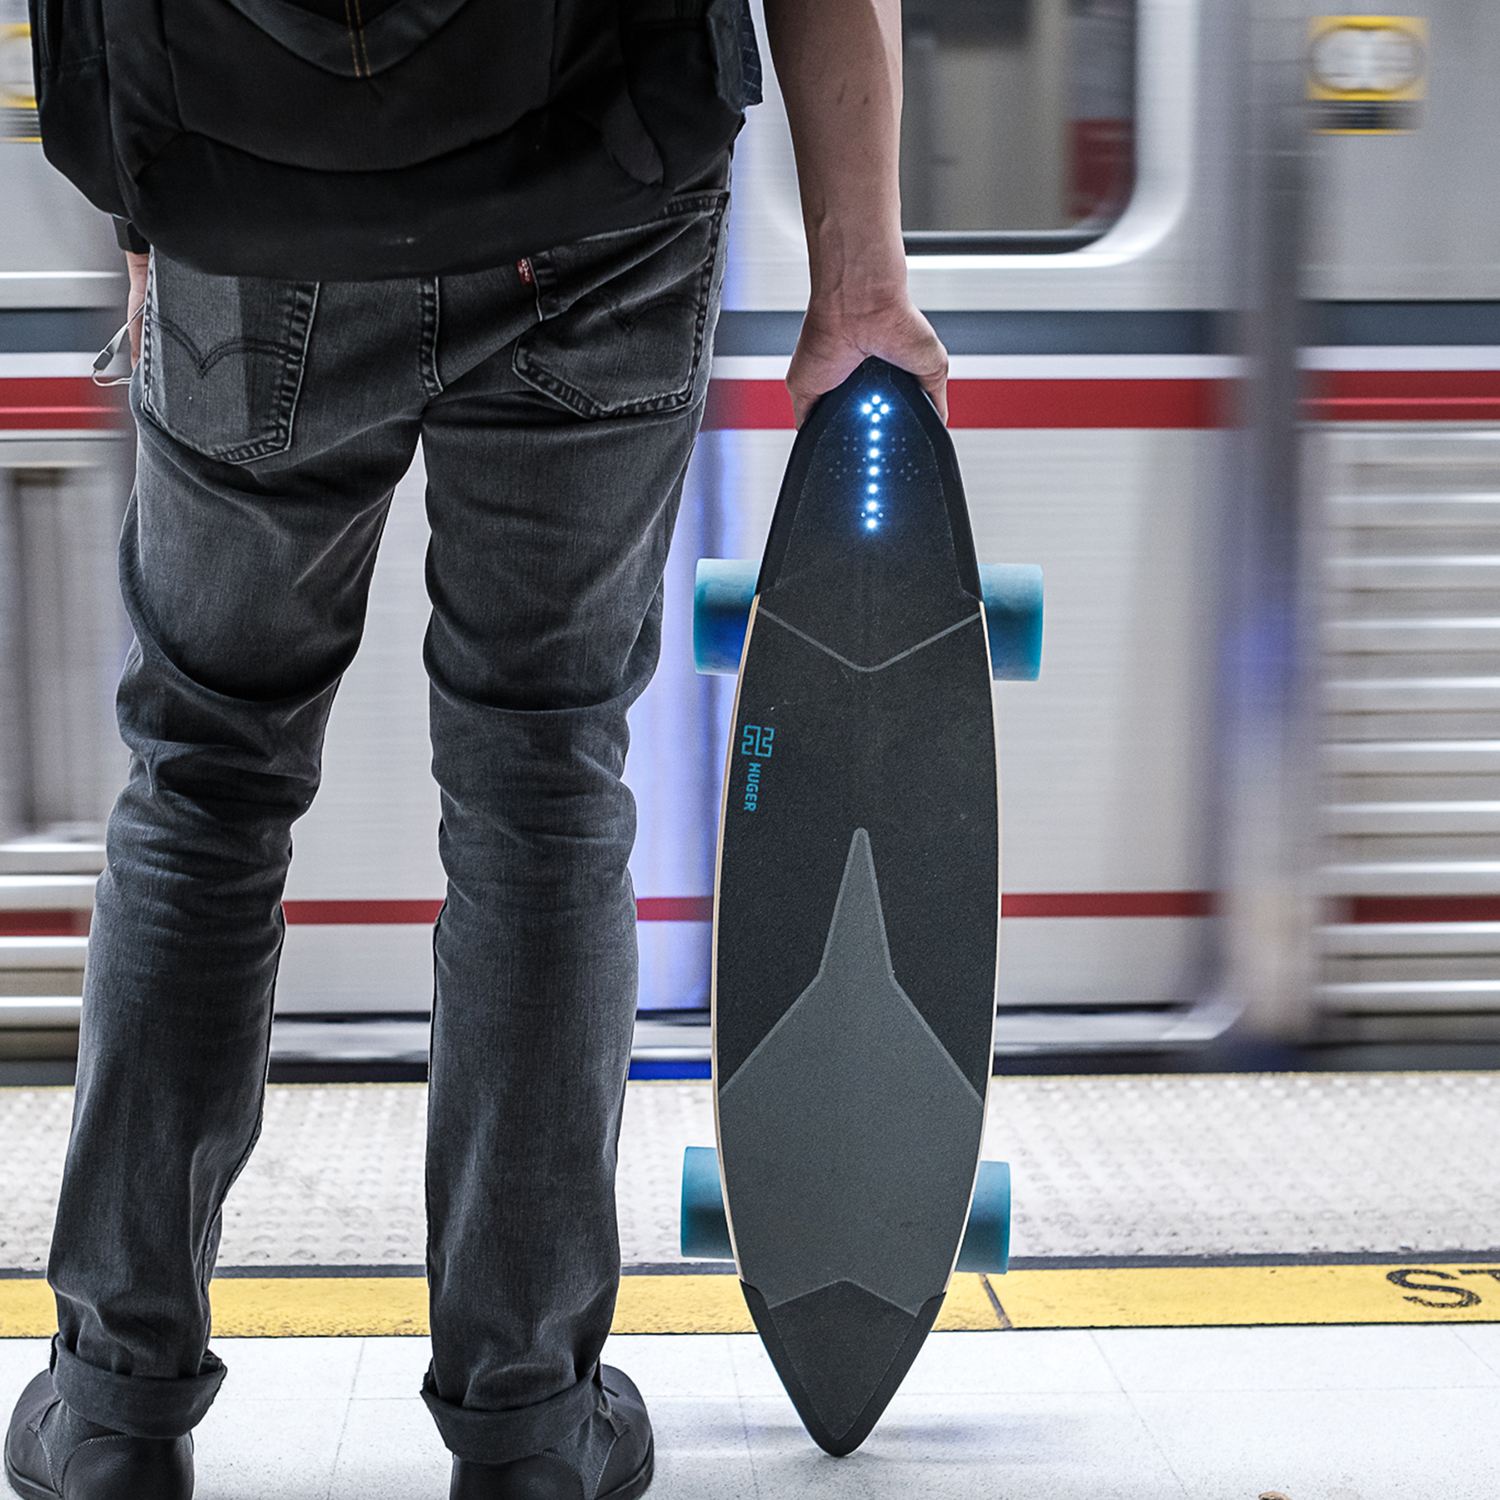 Huger board Electronic skateboard by valentino chow